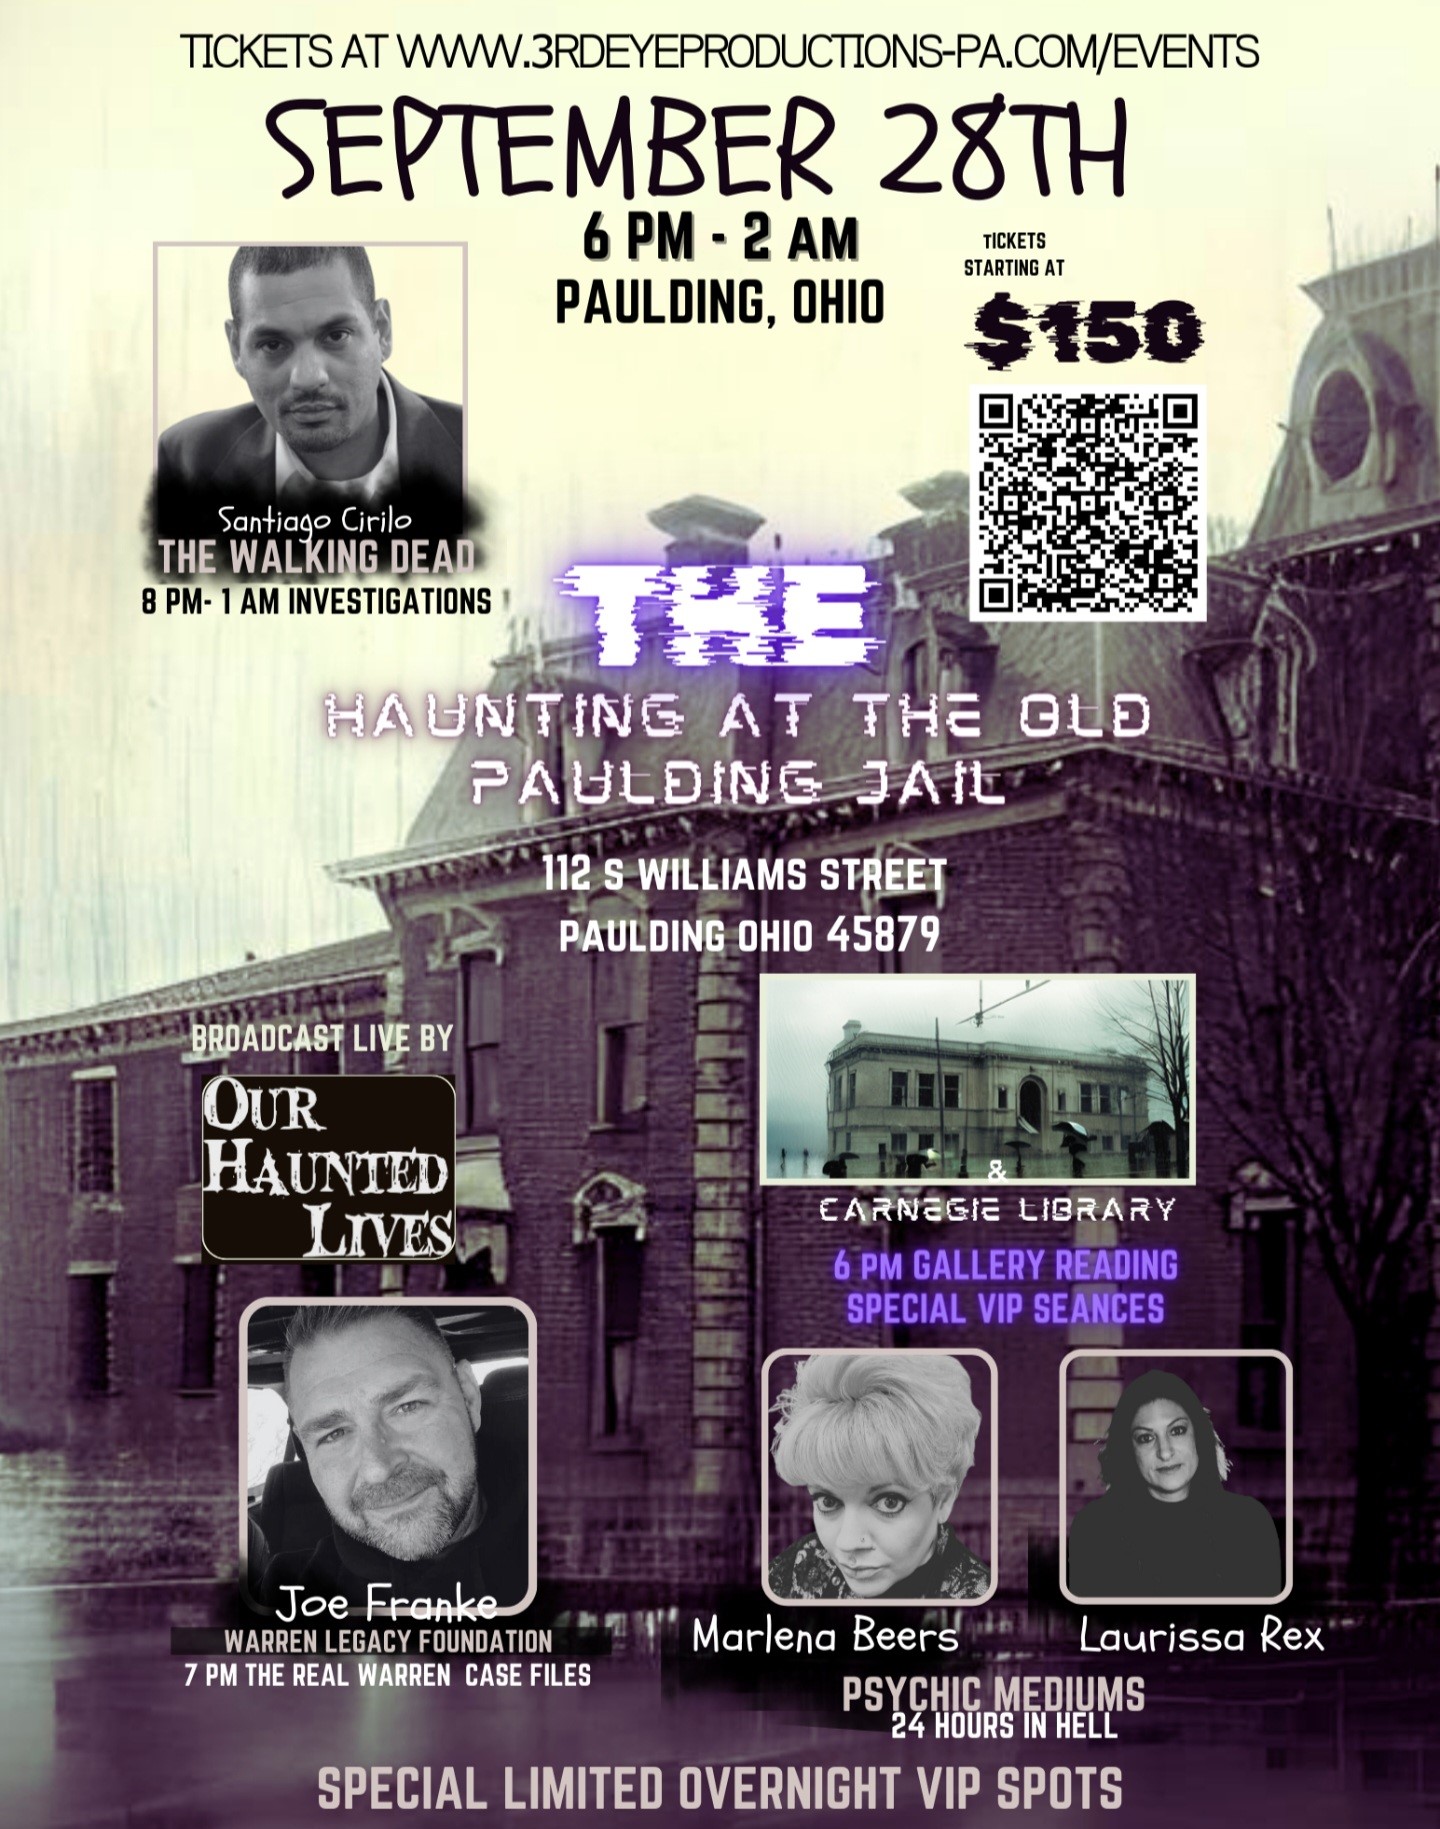 Haunted Legends of the Midwest: The Old Paulding Jail & Carnegie Library  on sep. 28, 18:00@The Old Paulding Jail - Compra entradas y obtén información enThird Eye Event Productions, L 